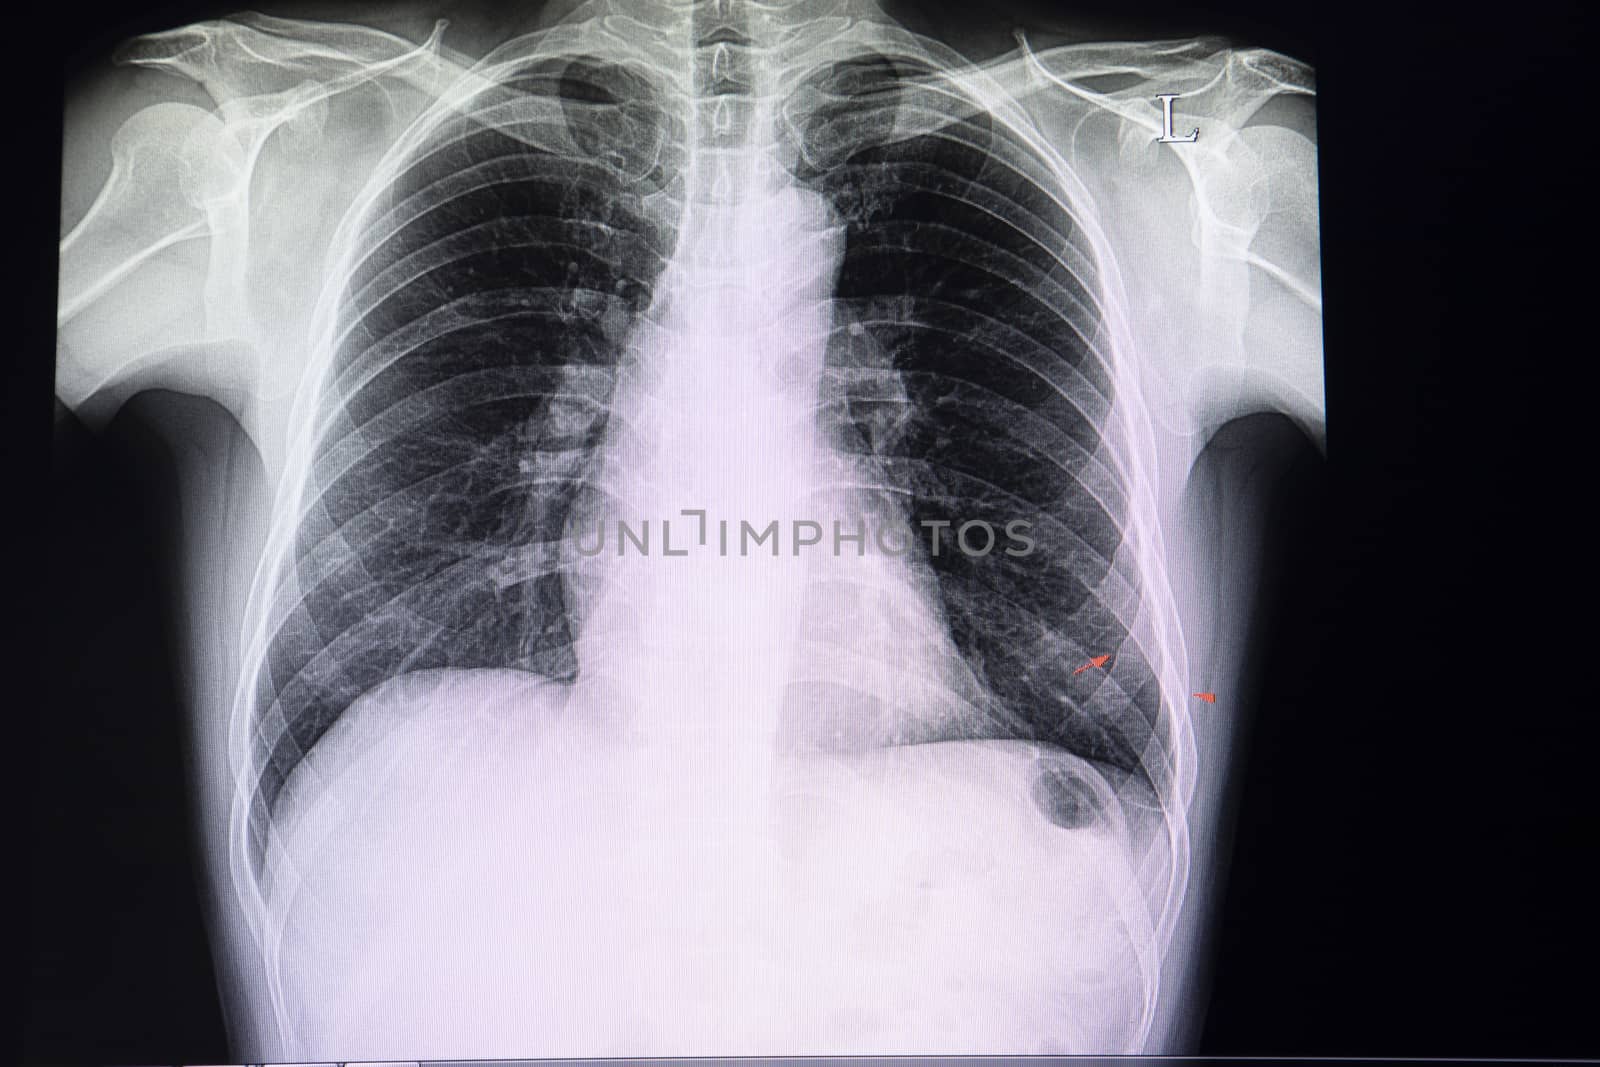 A chest xray film of a patient with old fractures on lateral ribs 7-8. A case of abnormal x ray. Pulmonary tumor suspected.